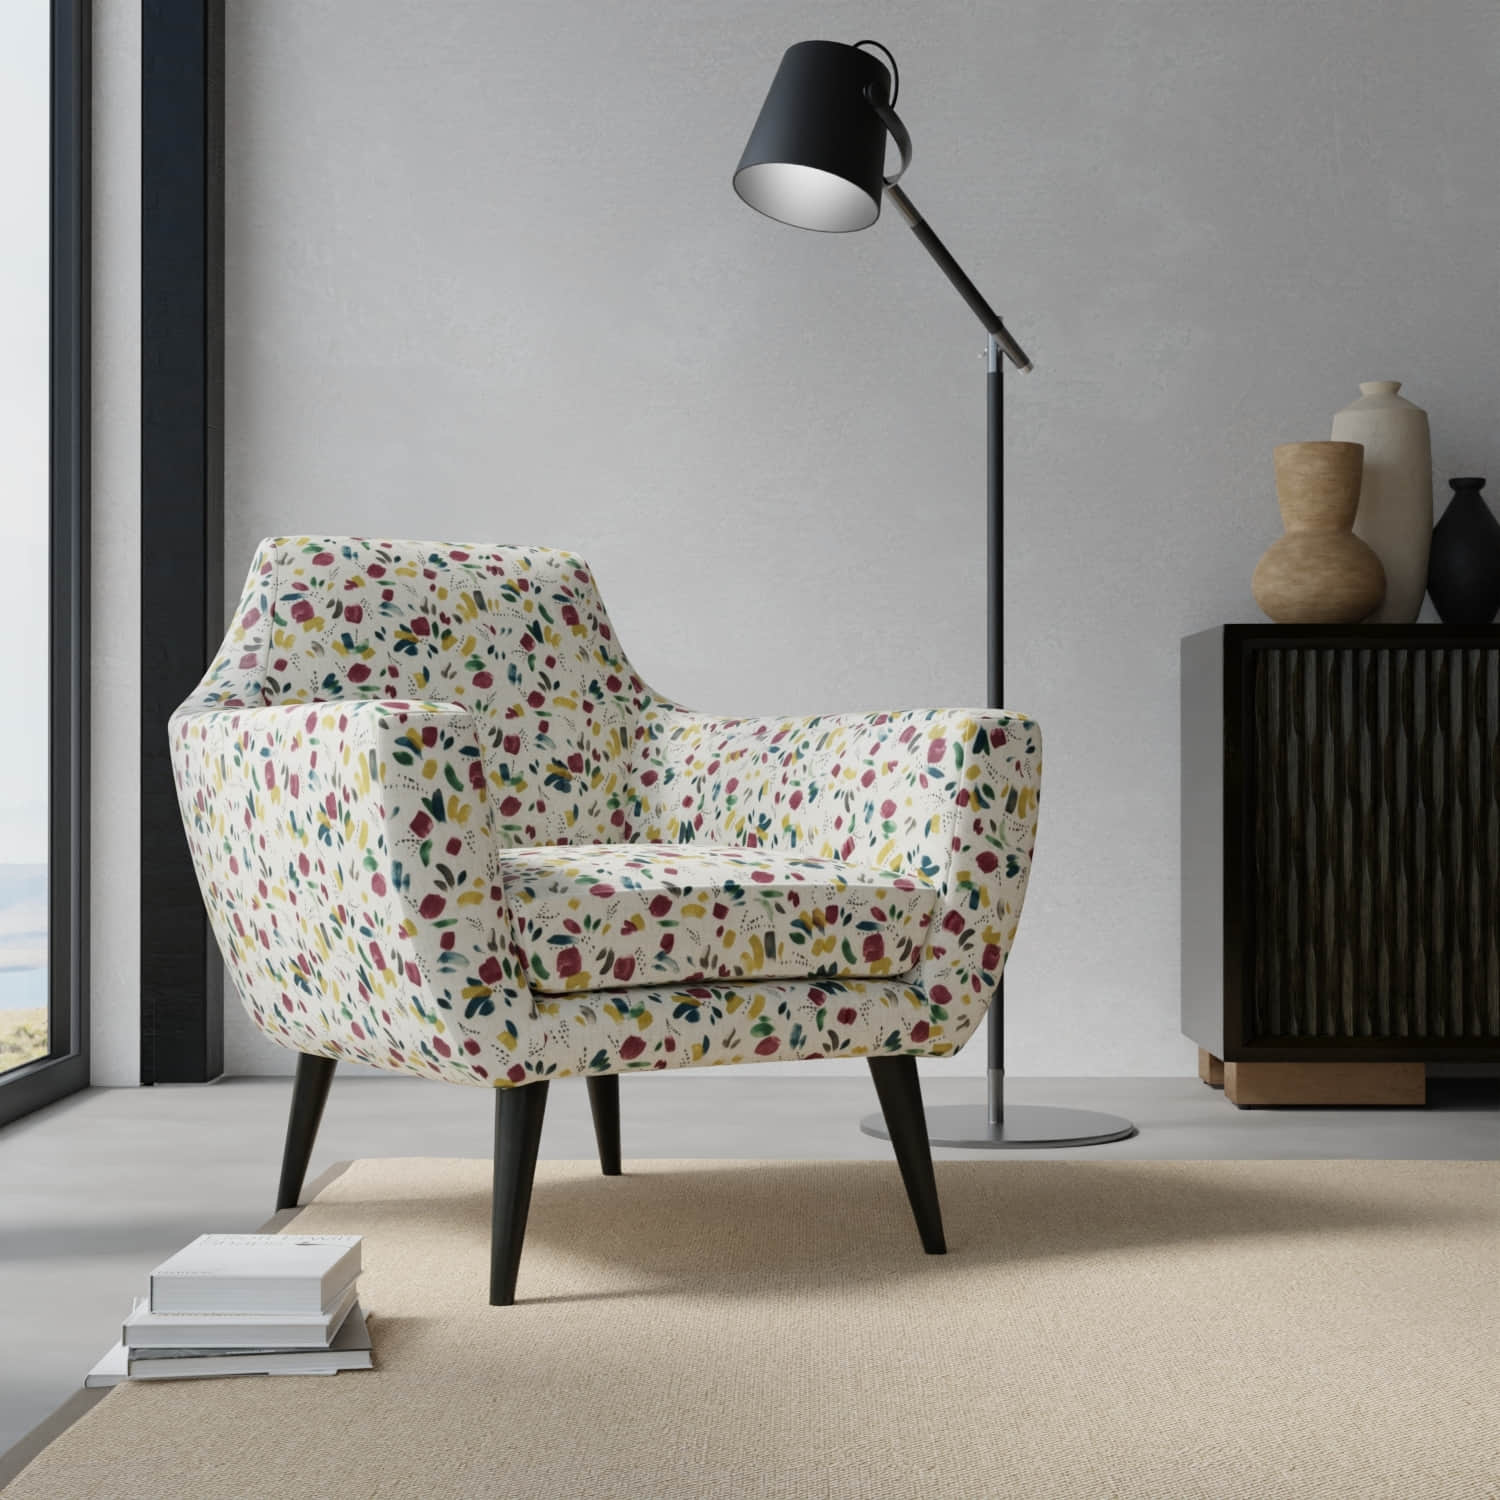 Ezra Berry upholstered on a contemporary chair